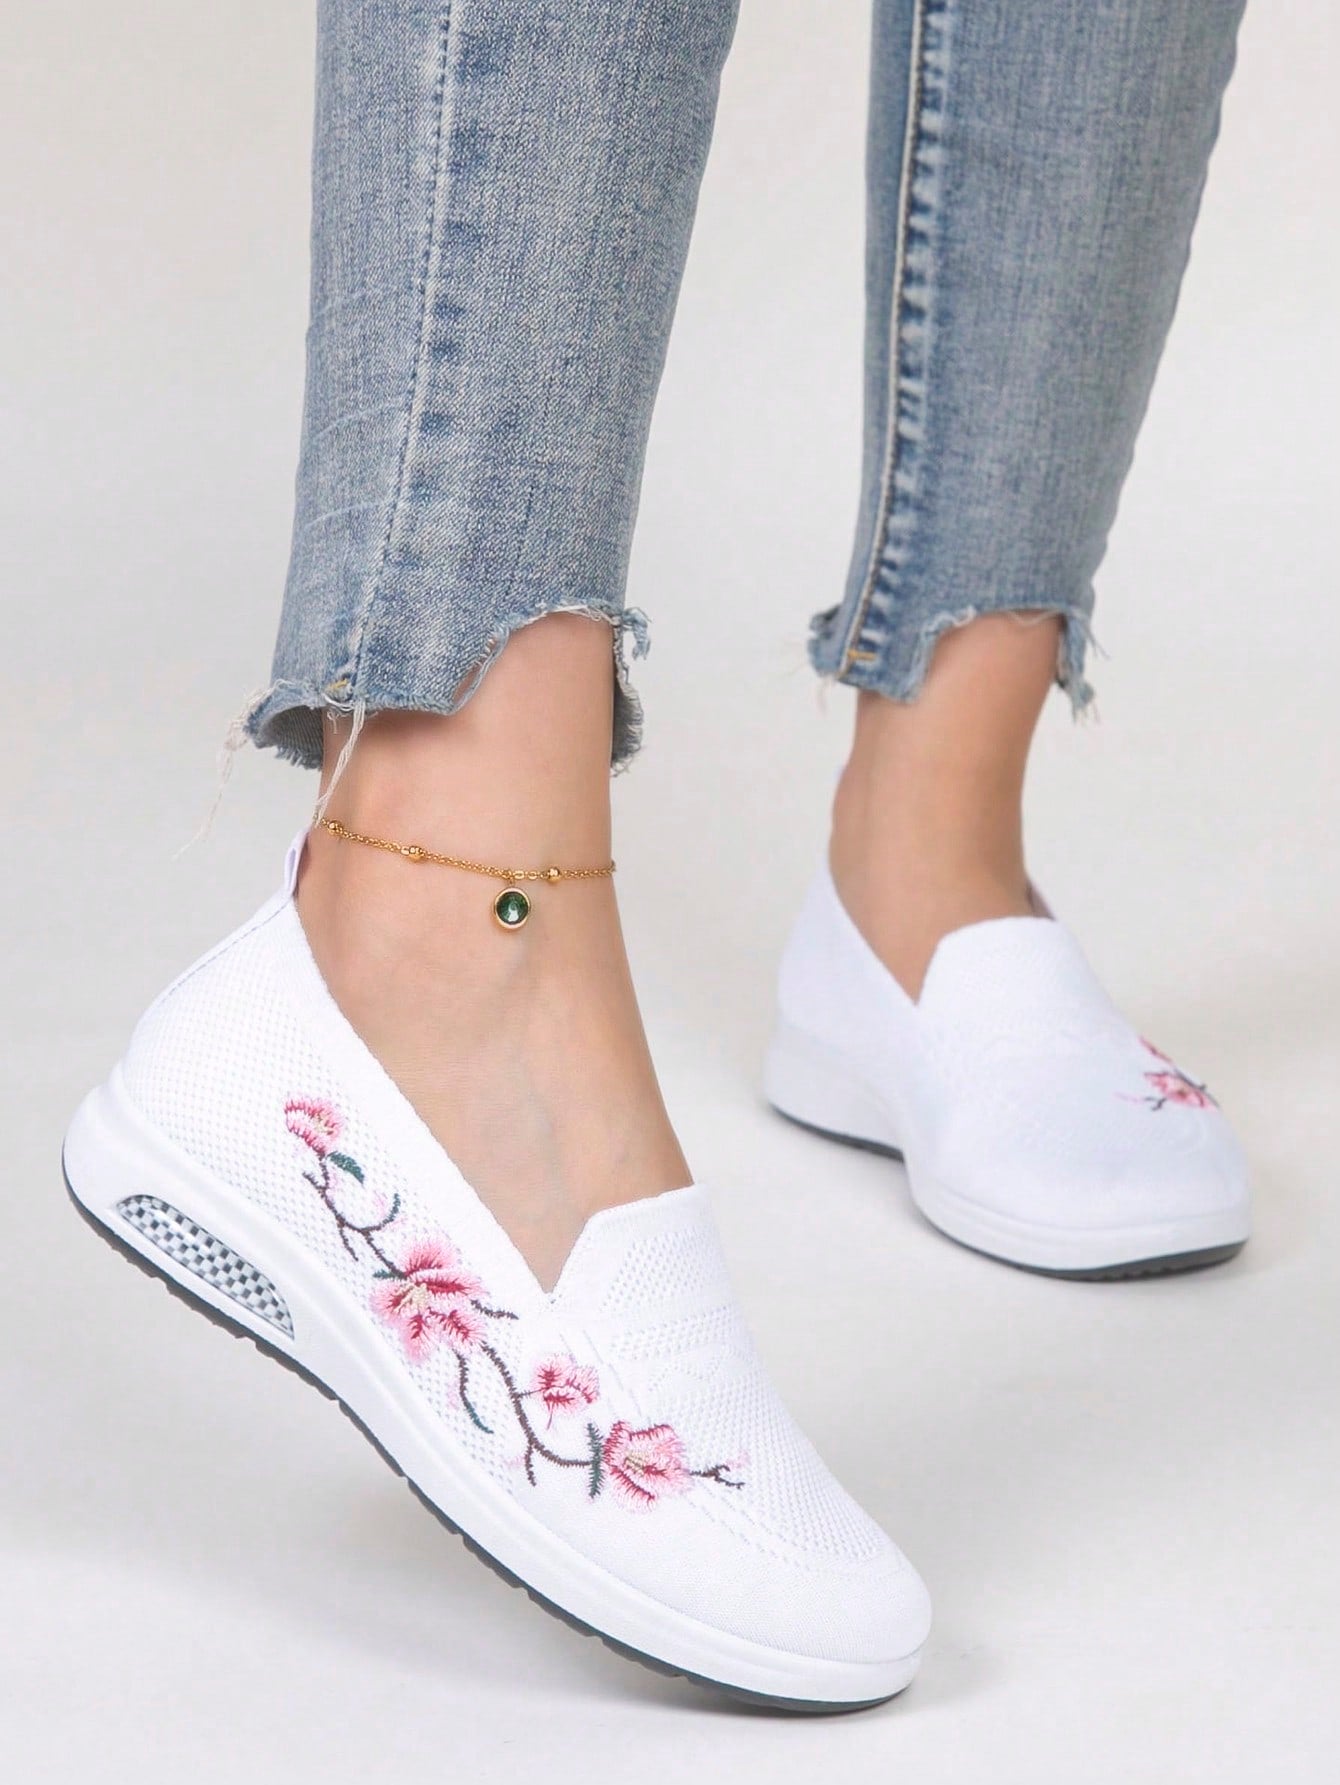 Women's Mesh Breathable, Comfortable, Lightweight, Round Toe, Slip-on, Embroidered Sneakers With Air Cushion. Spring New Arrival